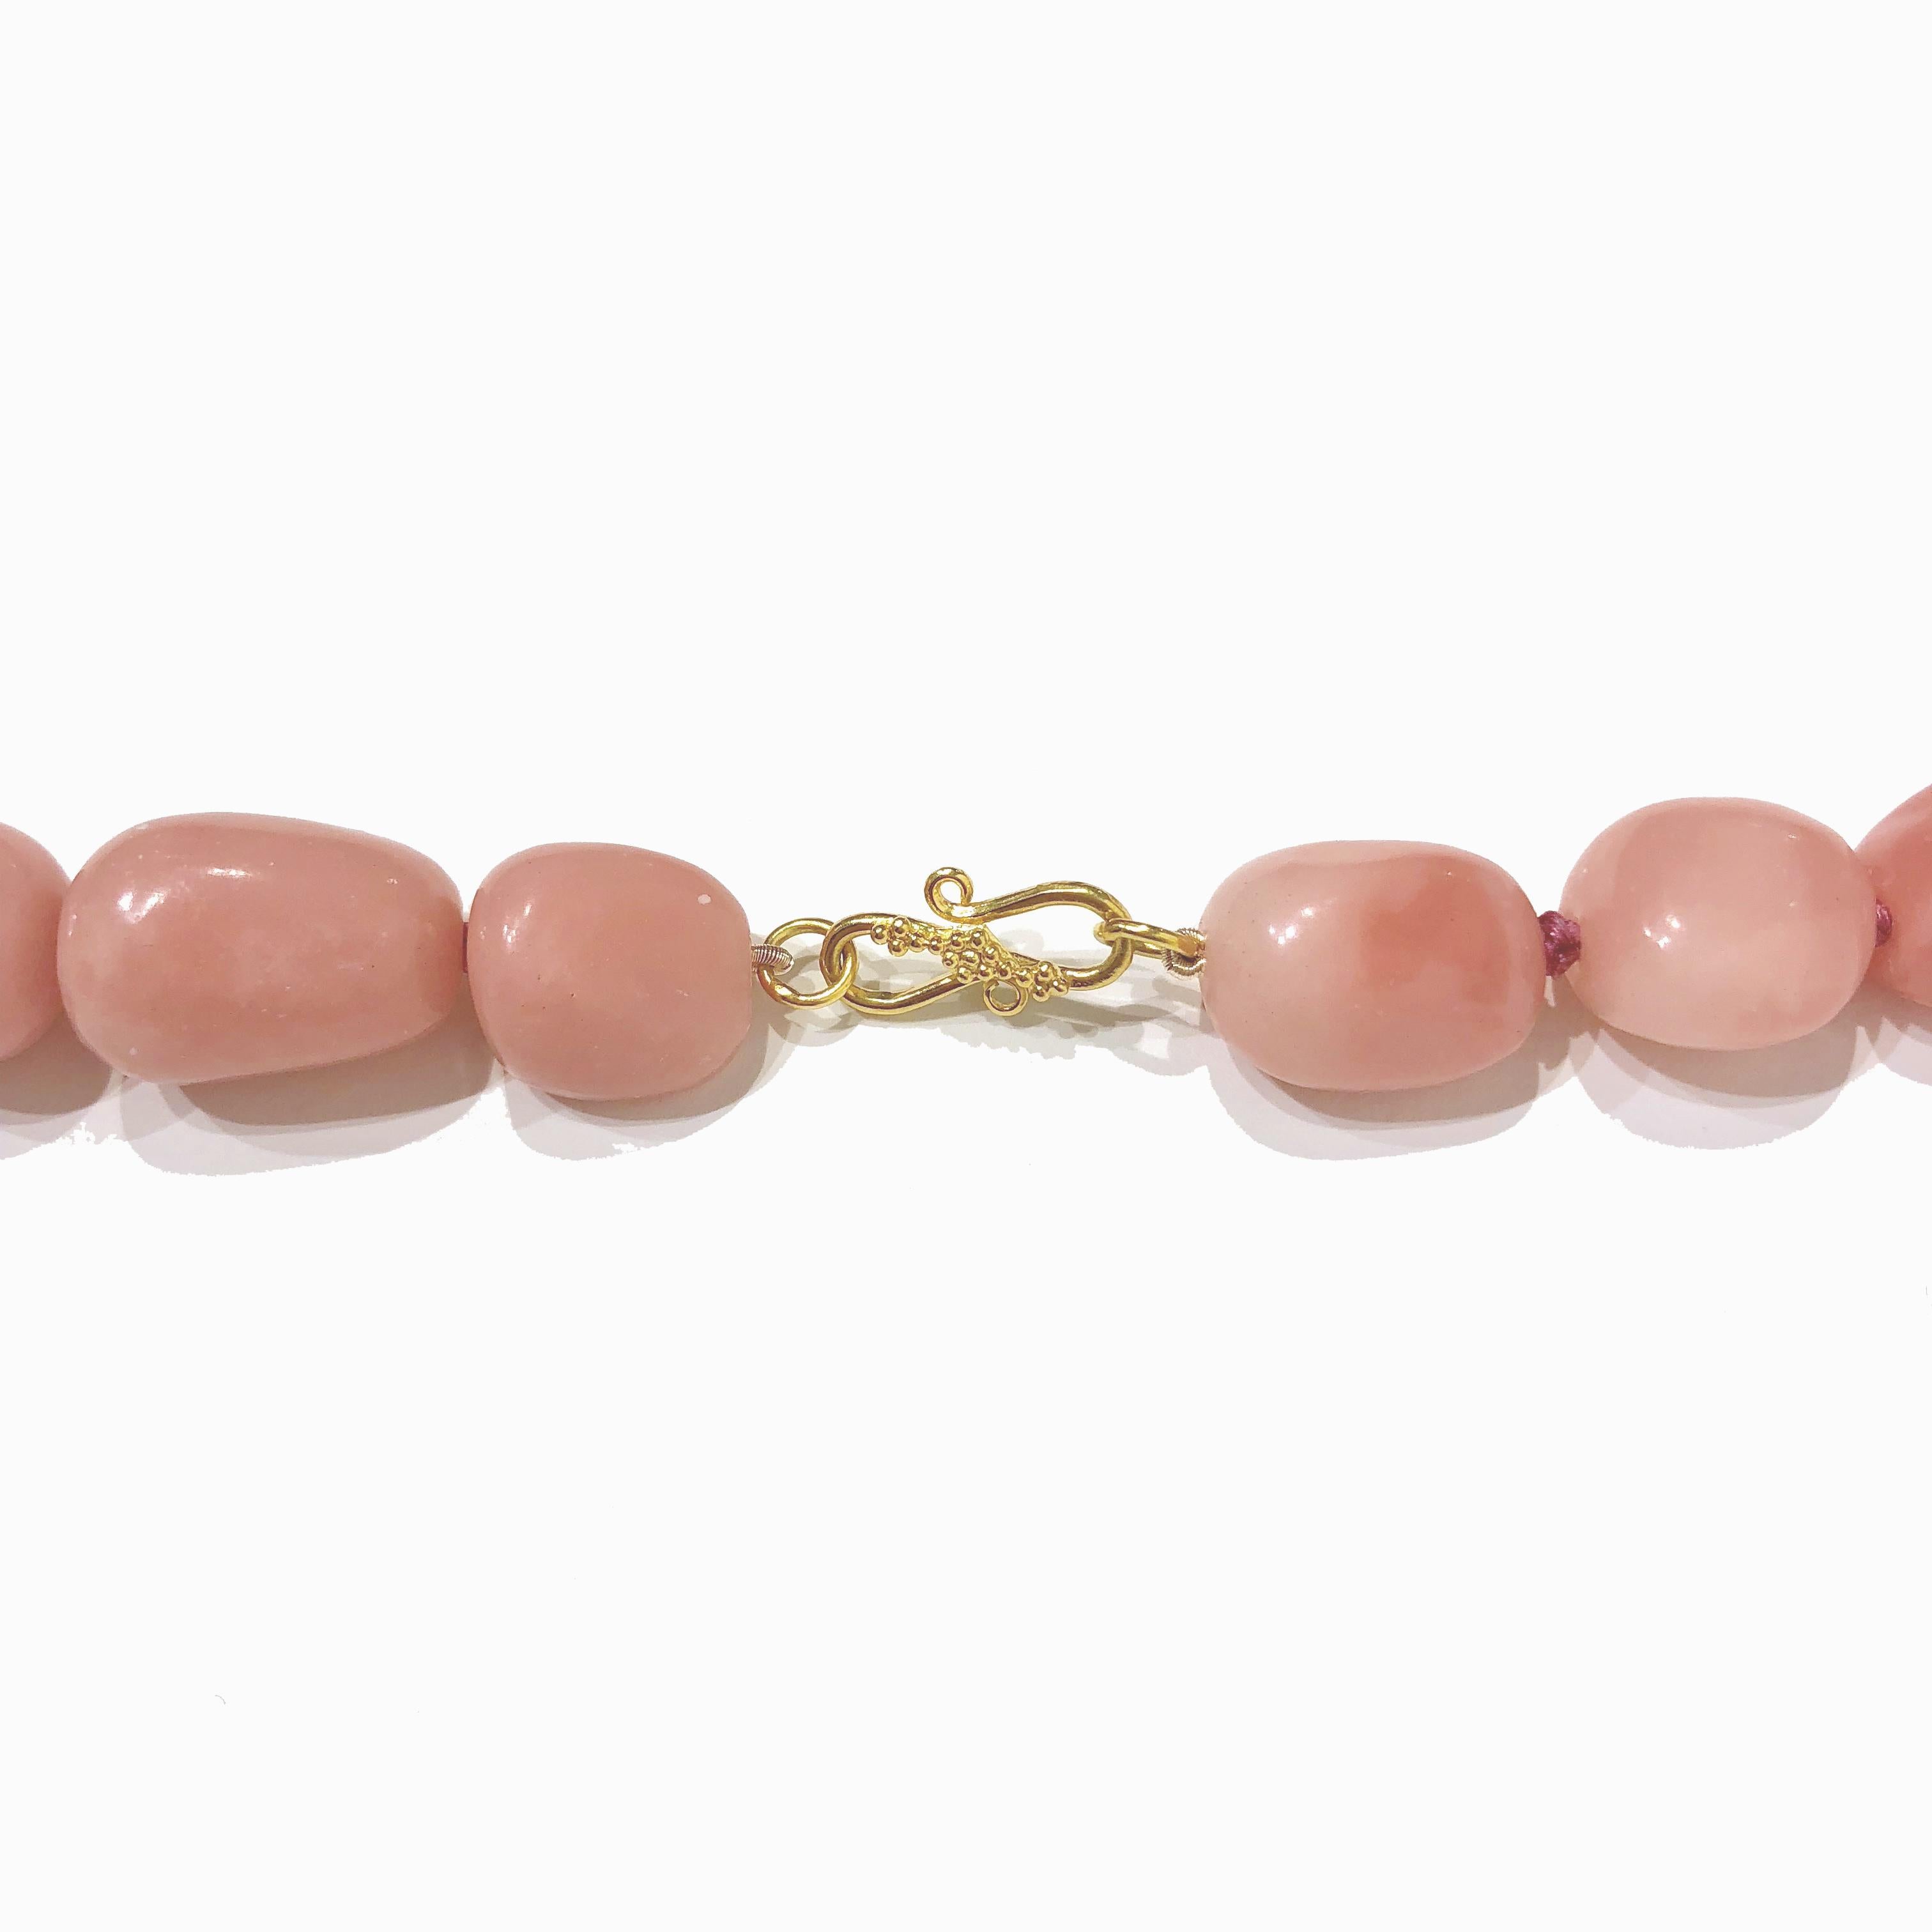 Contemporary Necklace with Pink Aragonite, Freshwater Pearls and 18 Karat Gold 